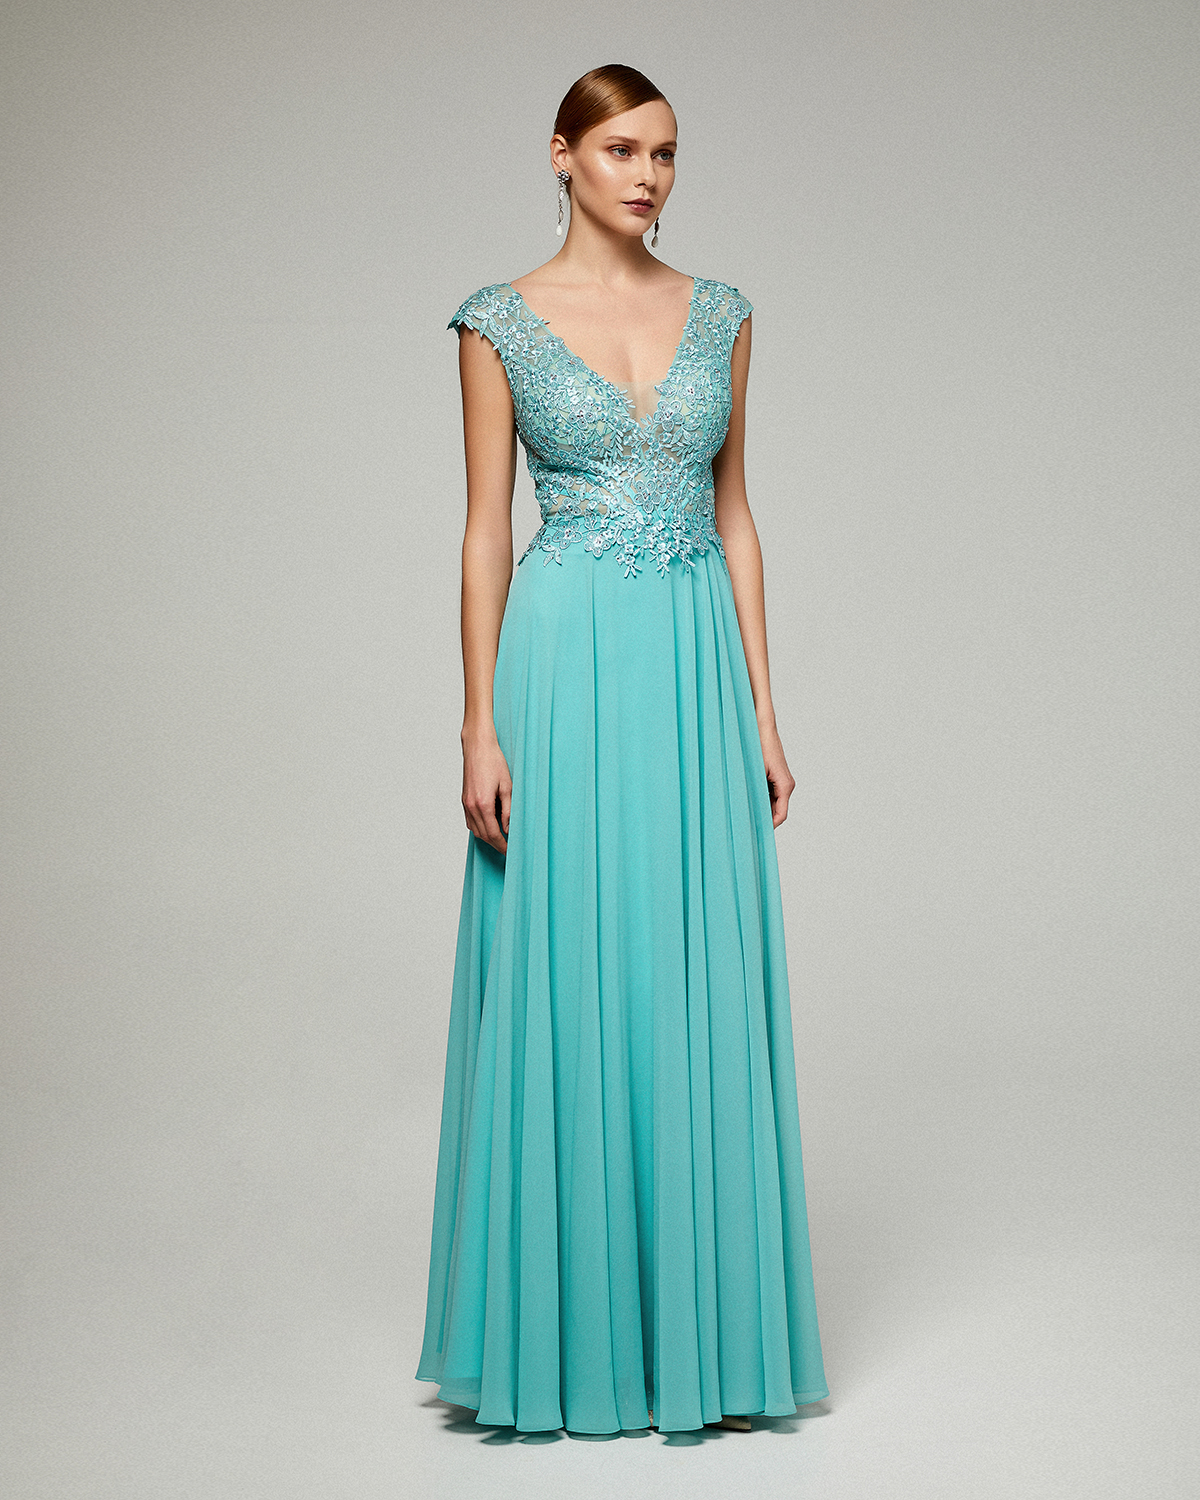 Classic Dresses / Long dress with chiffon fabric, beaded top with lace